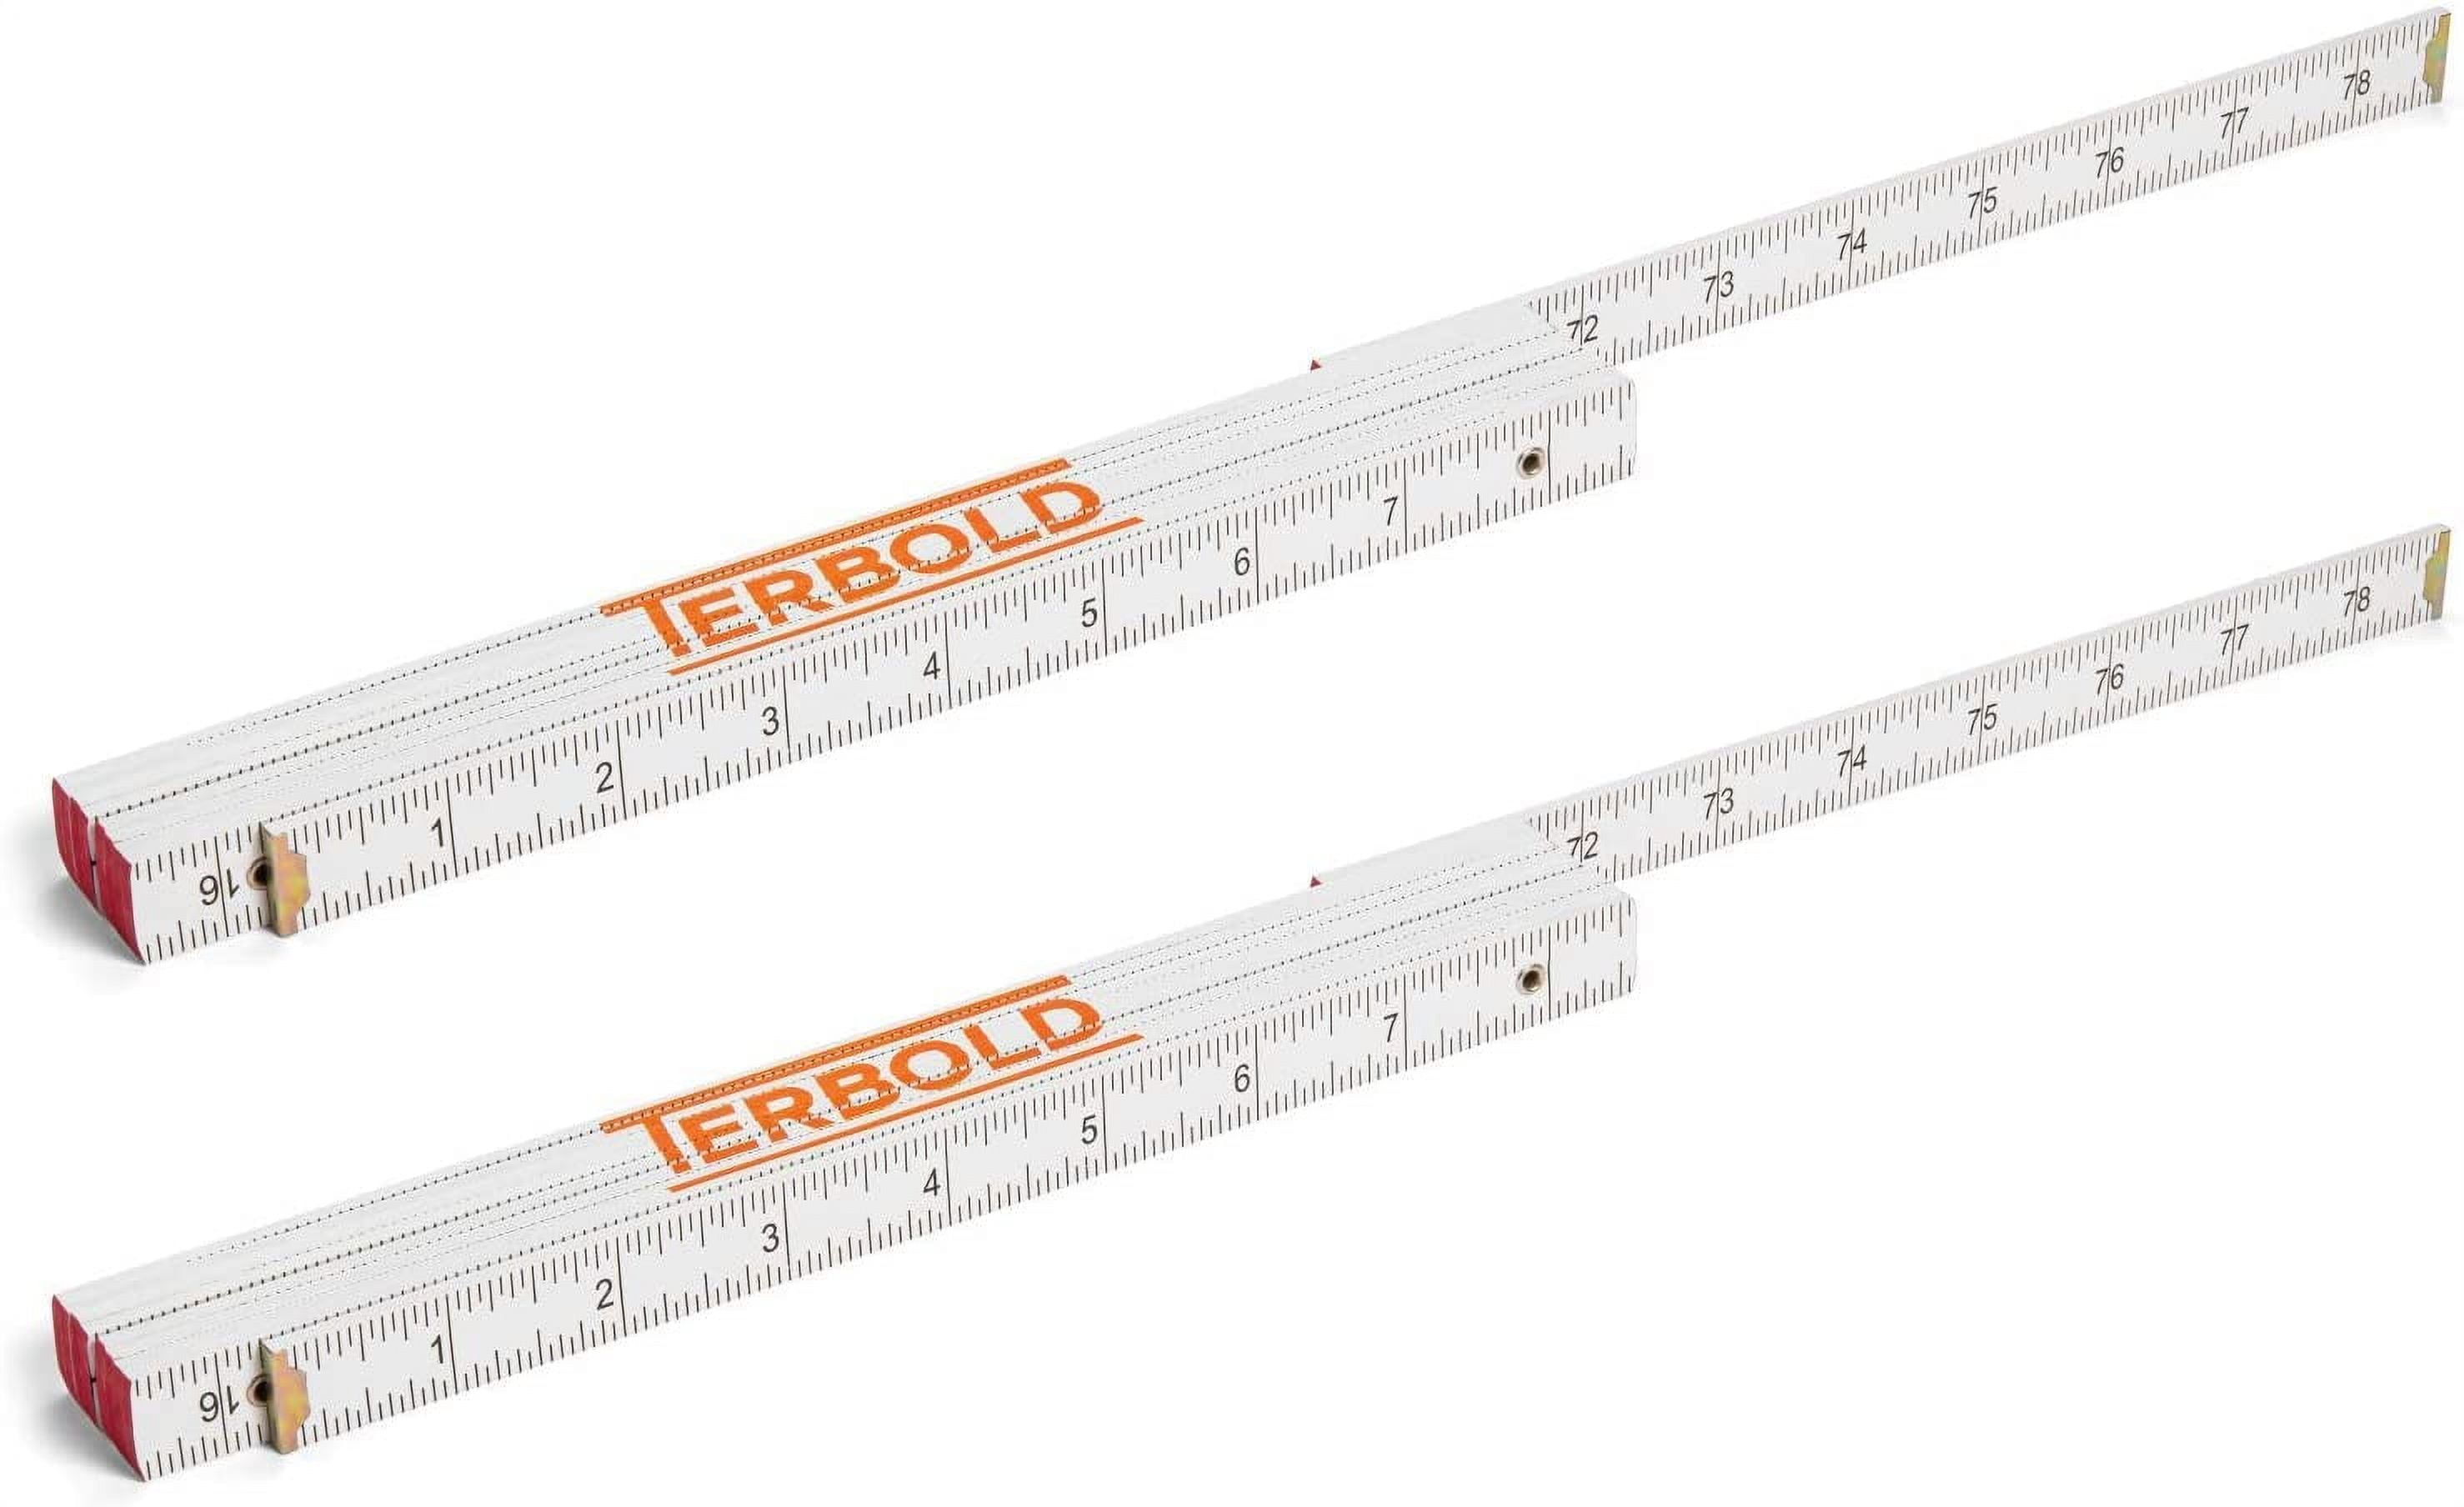 Westcott 10375 Wood Ruler, Metric and 1/16-Inch Scale with Single Metal  Edge, 30 cm